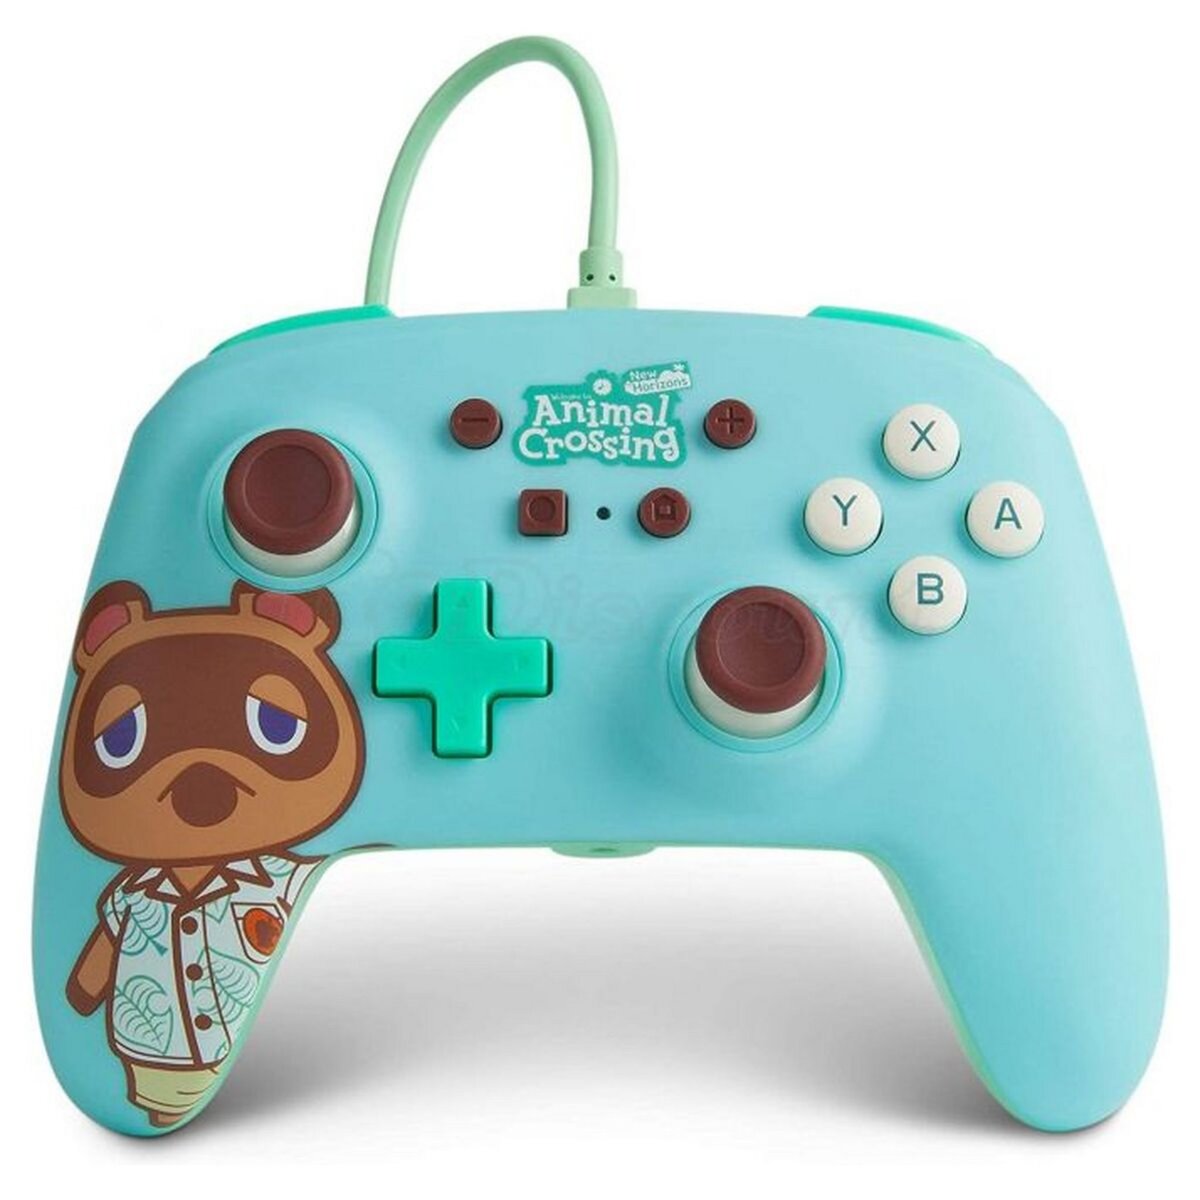 POWER A Manette Filaire Tom Nook Animal Crossing Nintendo Switch